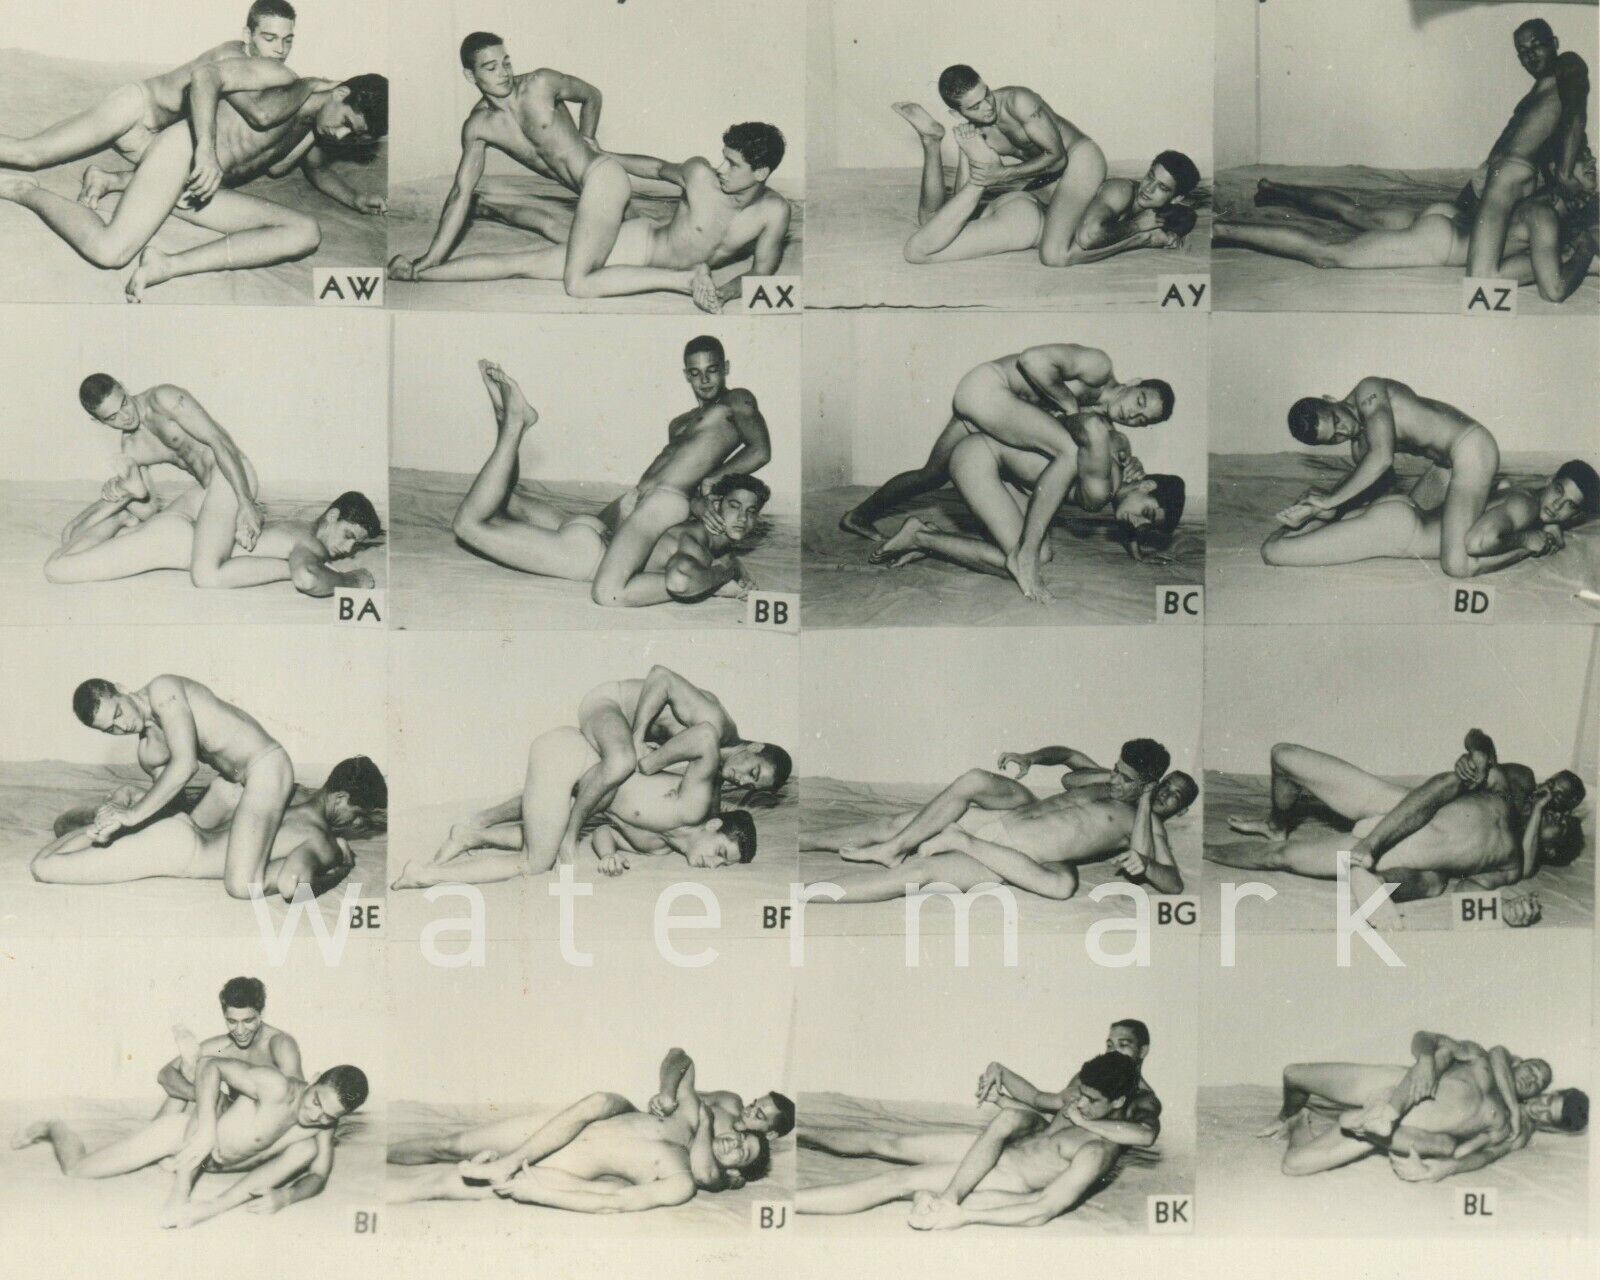 Male pinup couple wrestling. Reprinted on Kodak paper. Gay interest.